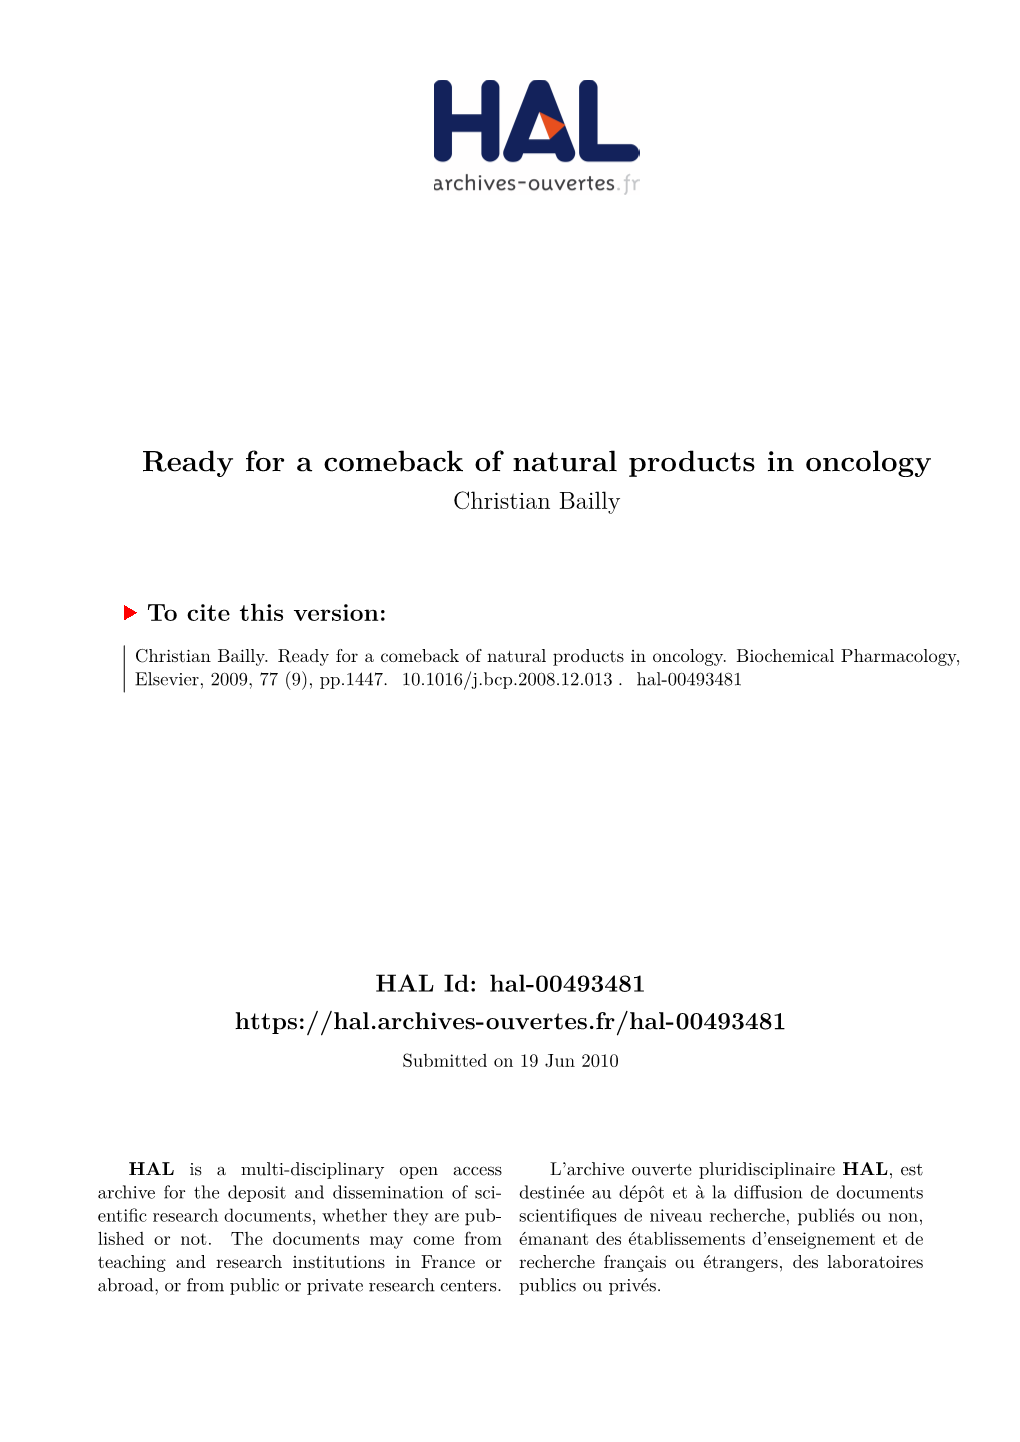 Ready for a Comeback of Natural Products in Oncology Christian Bailly